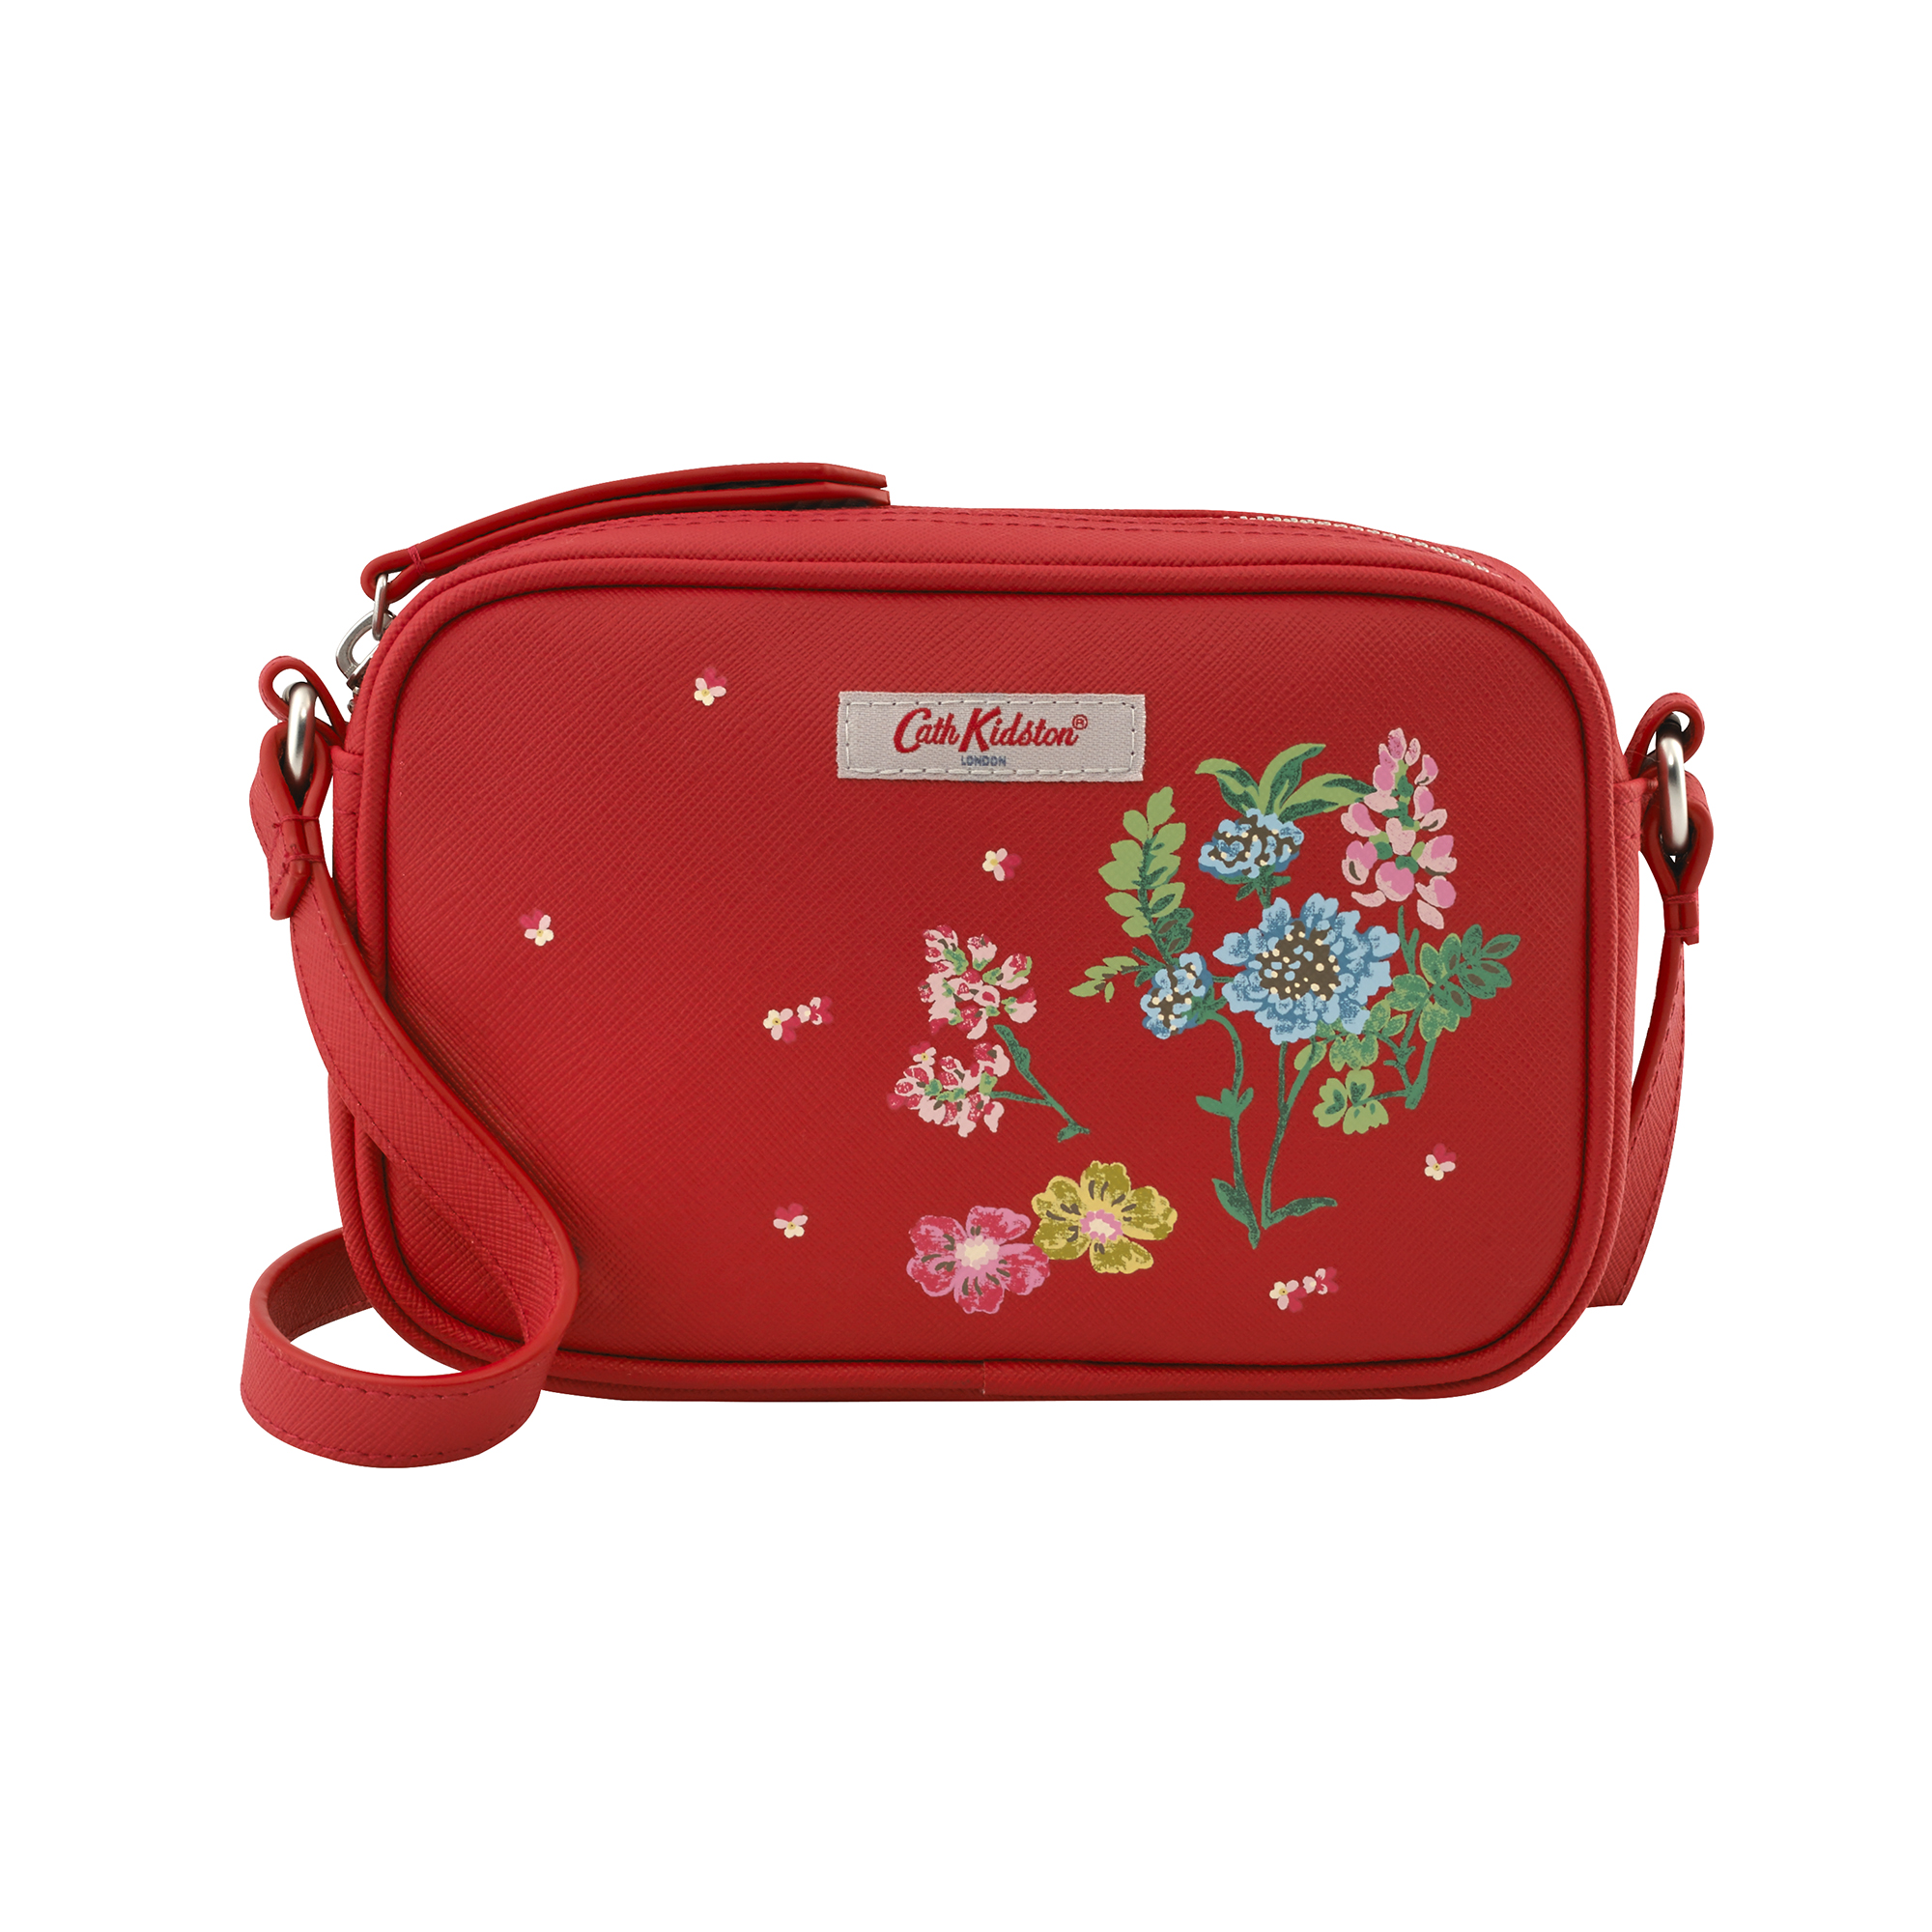 Cath Kidston Bags for Women Philippines 